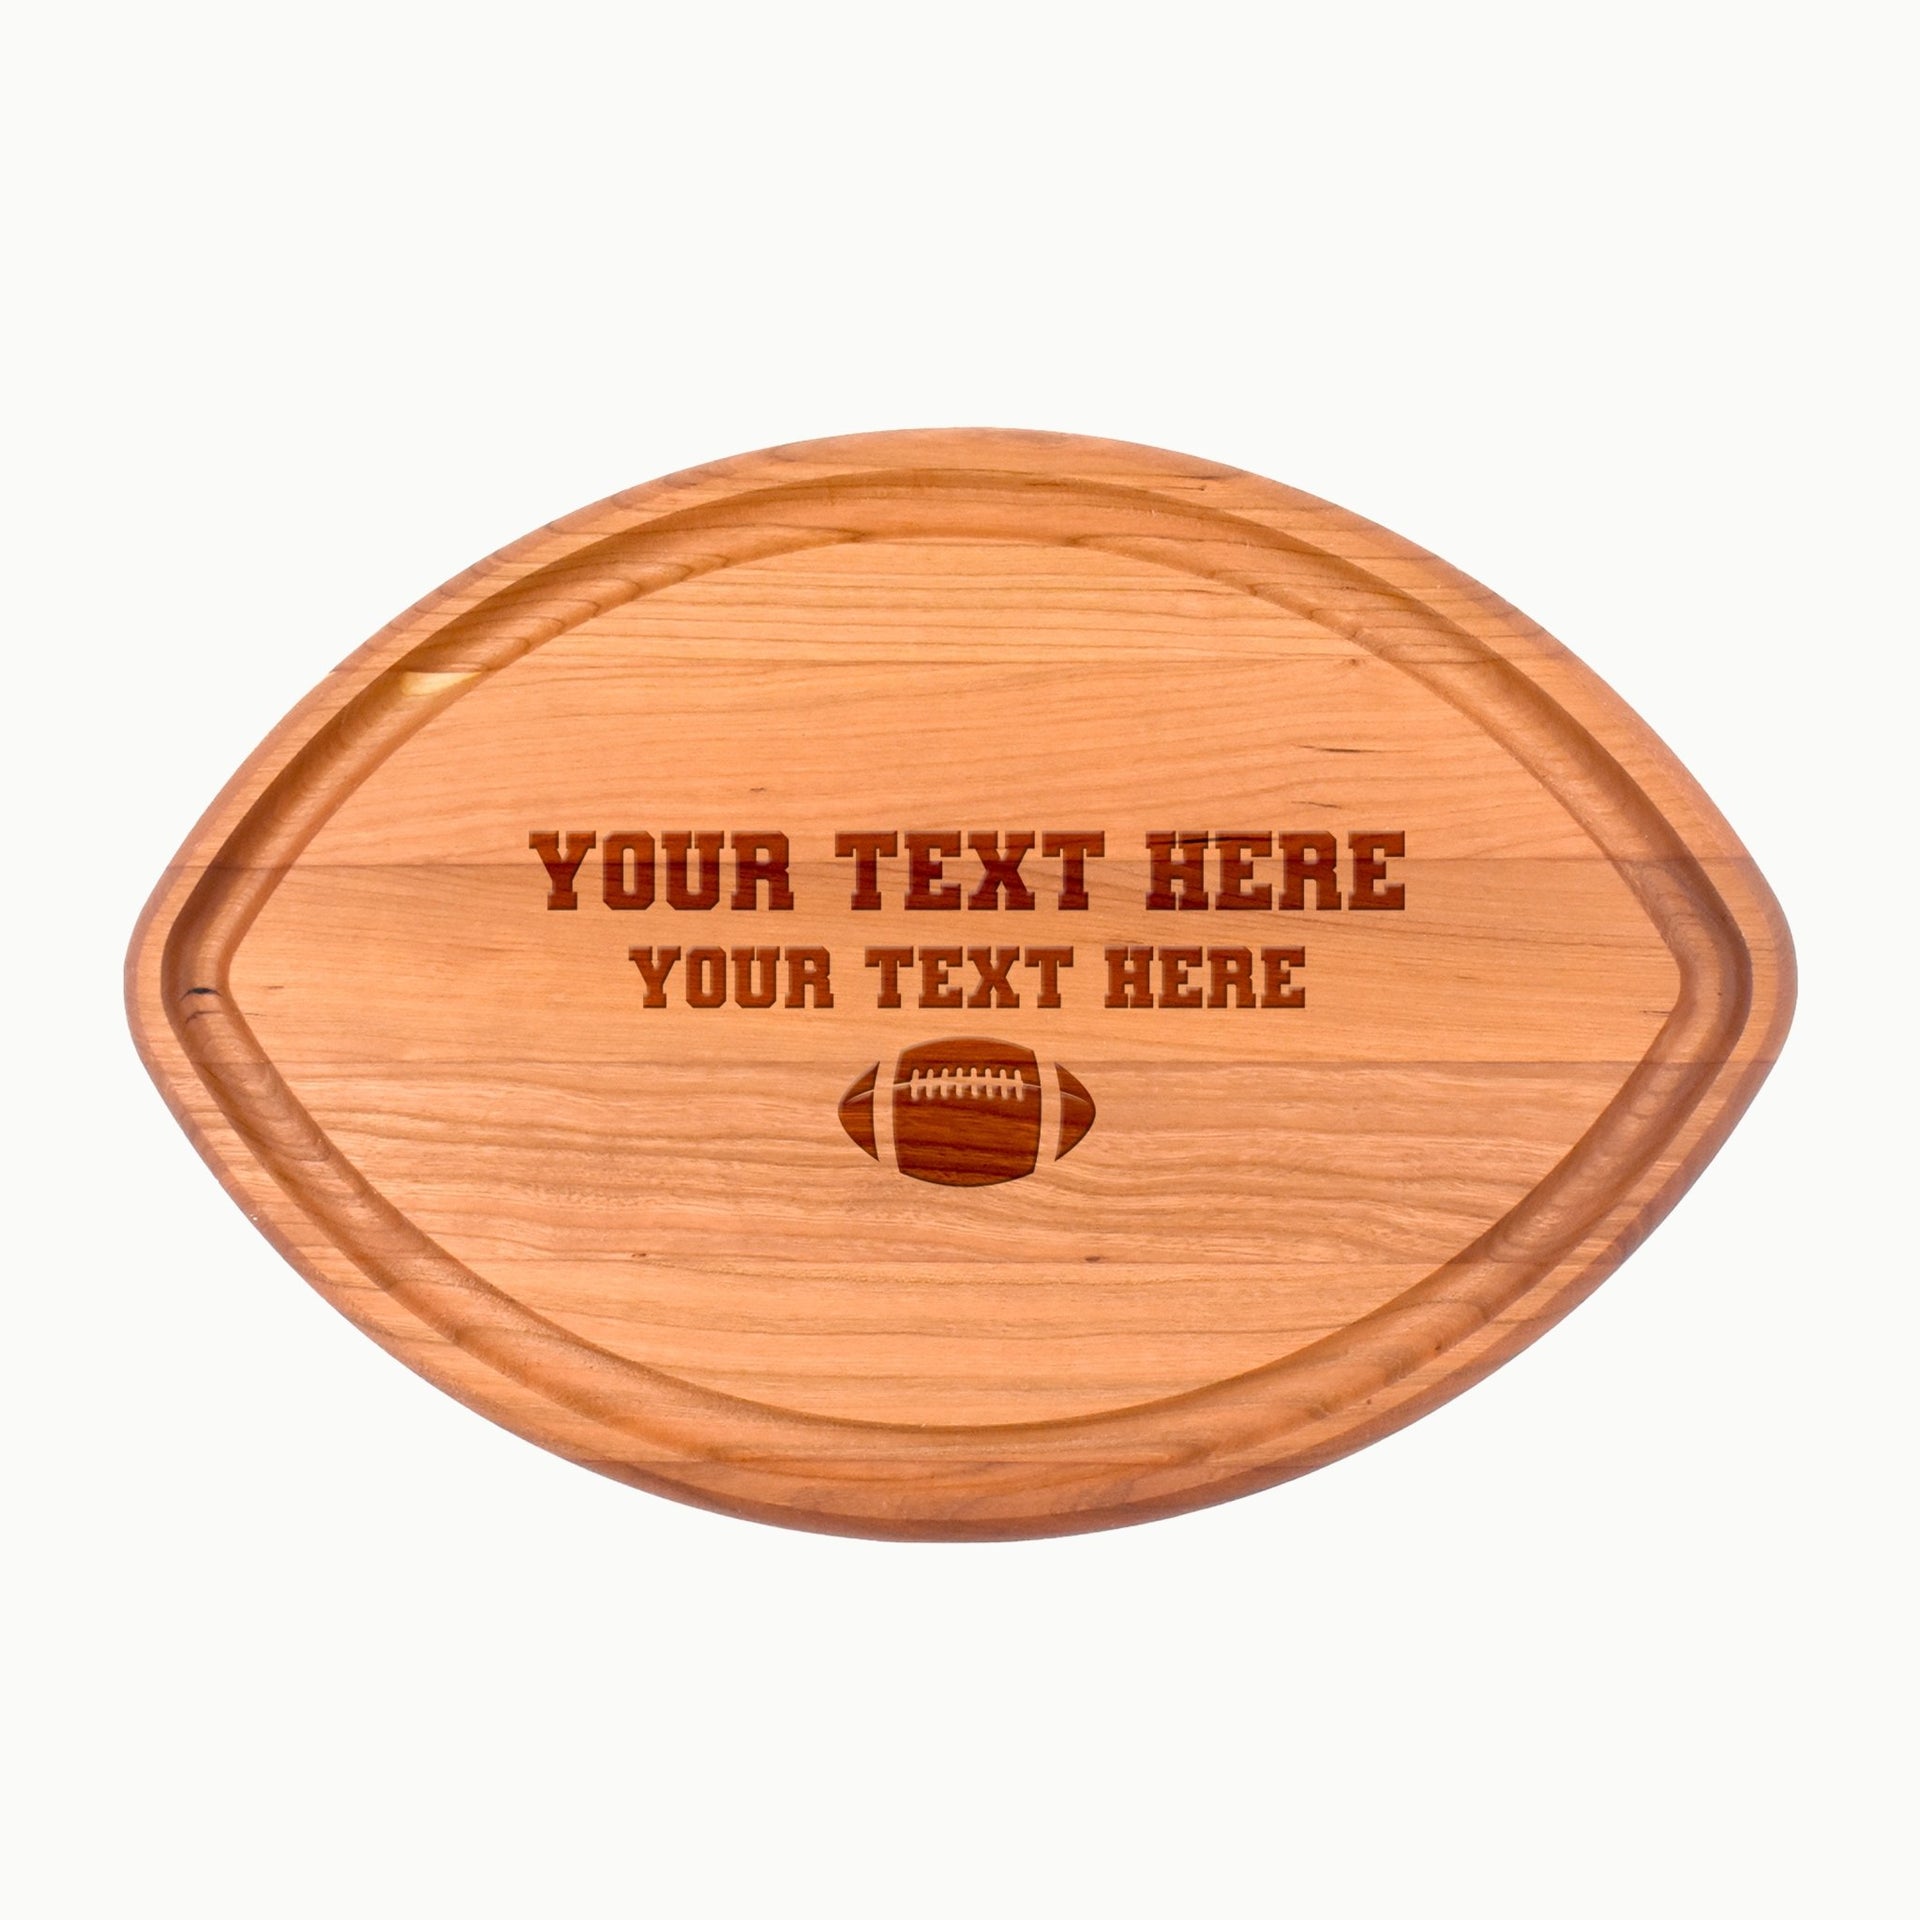 Custom Football Cutting Board / Serving Board with Your Text - Mod Peach